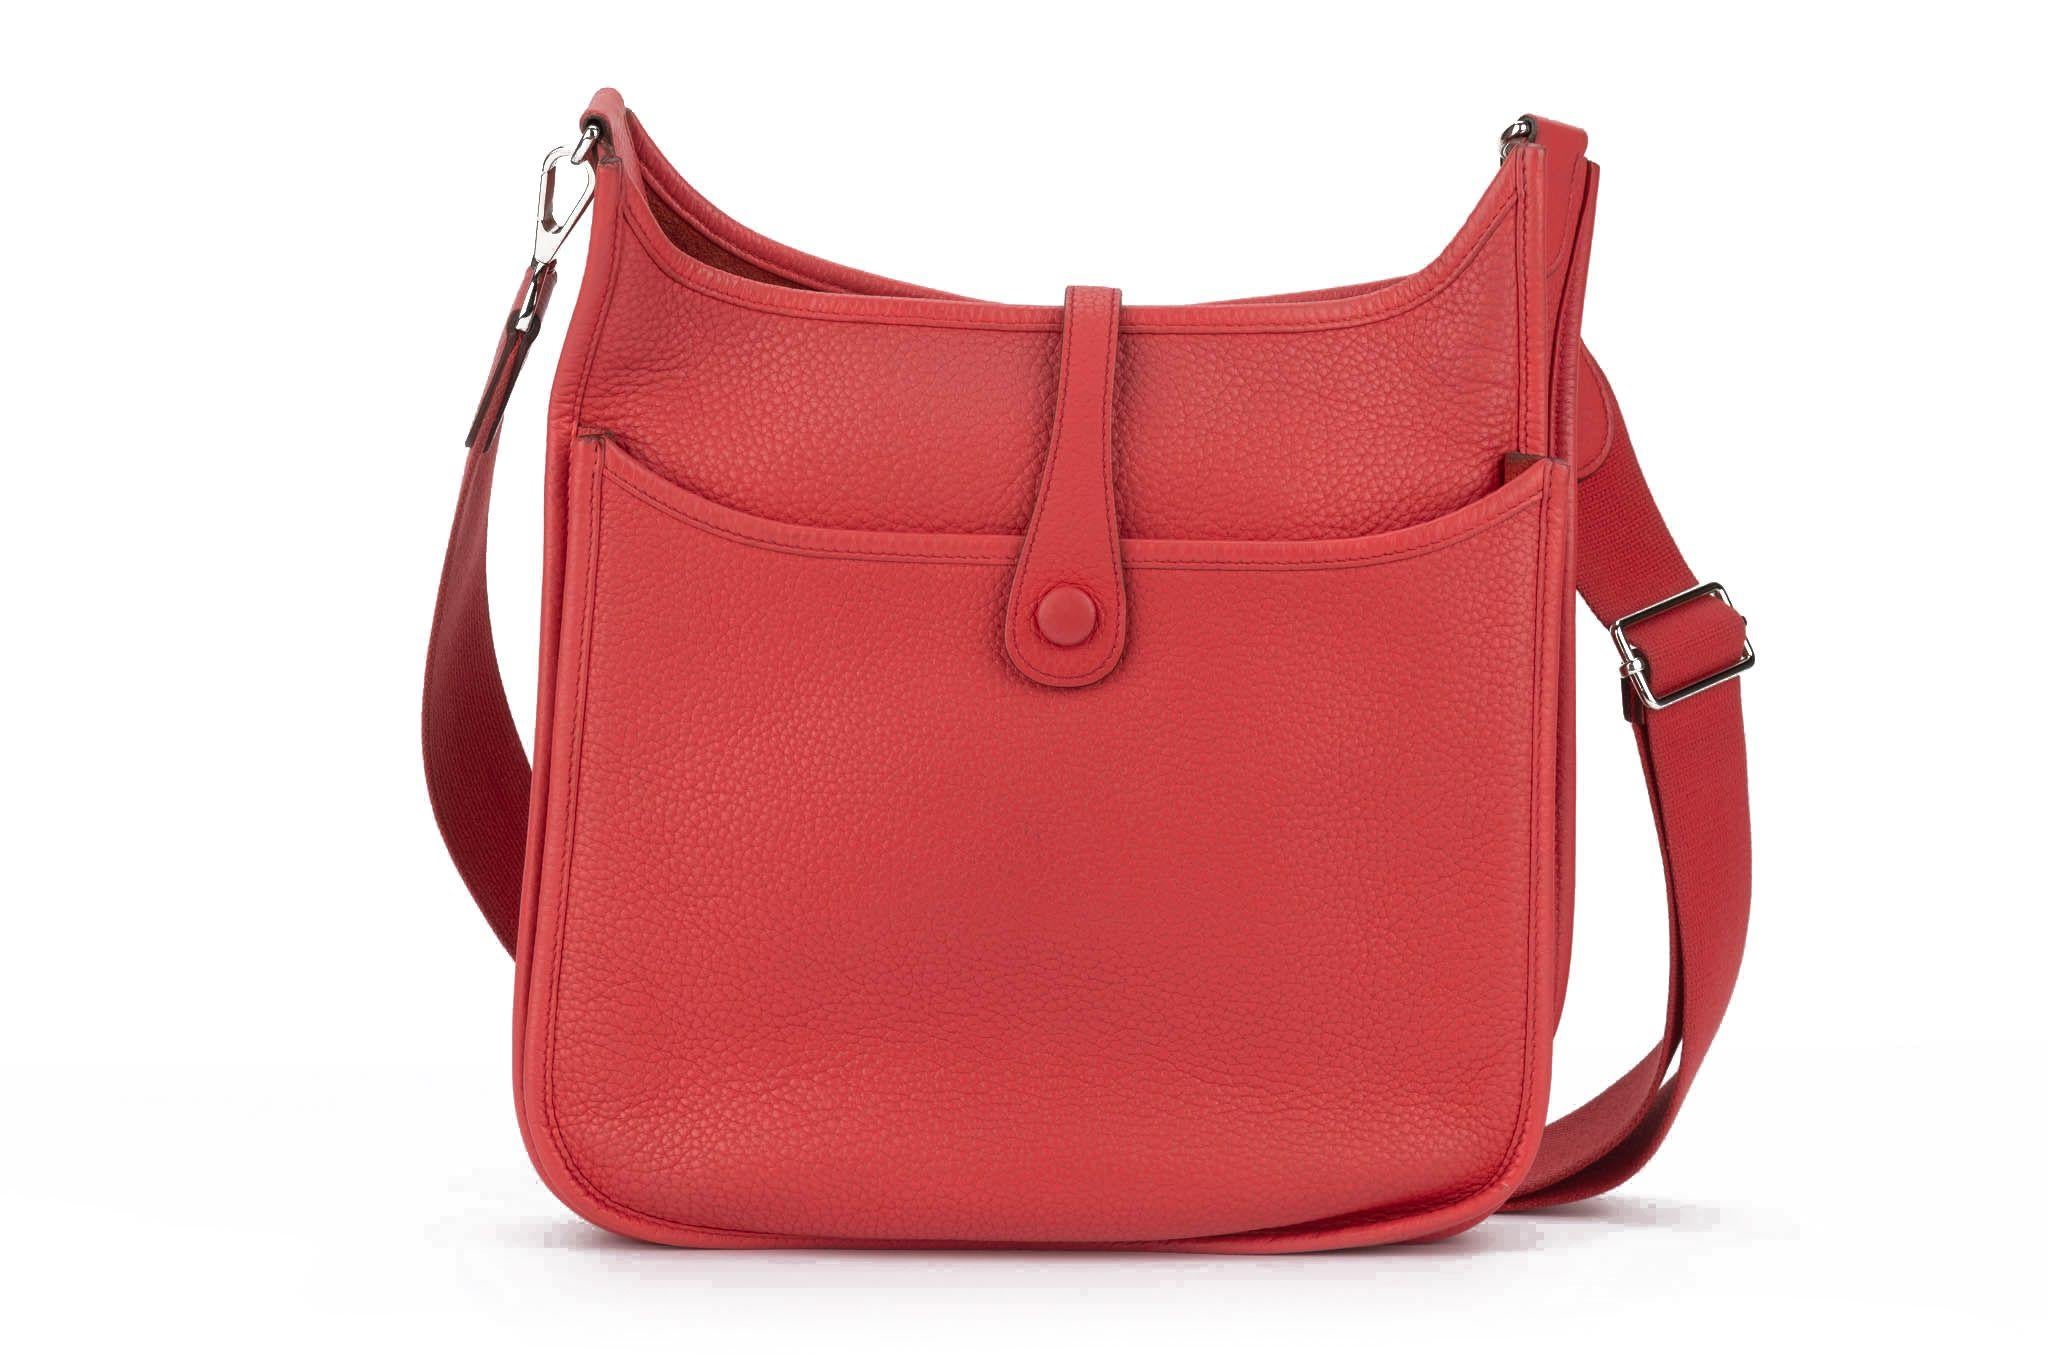 Hermès Bouganville Evelyne PM Clemence In Excellent Condition For Sale In West Hollywood, CA